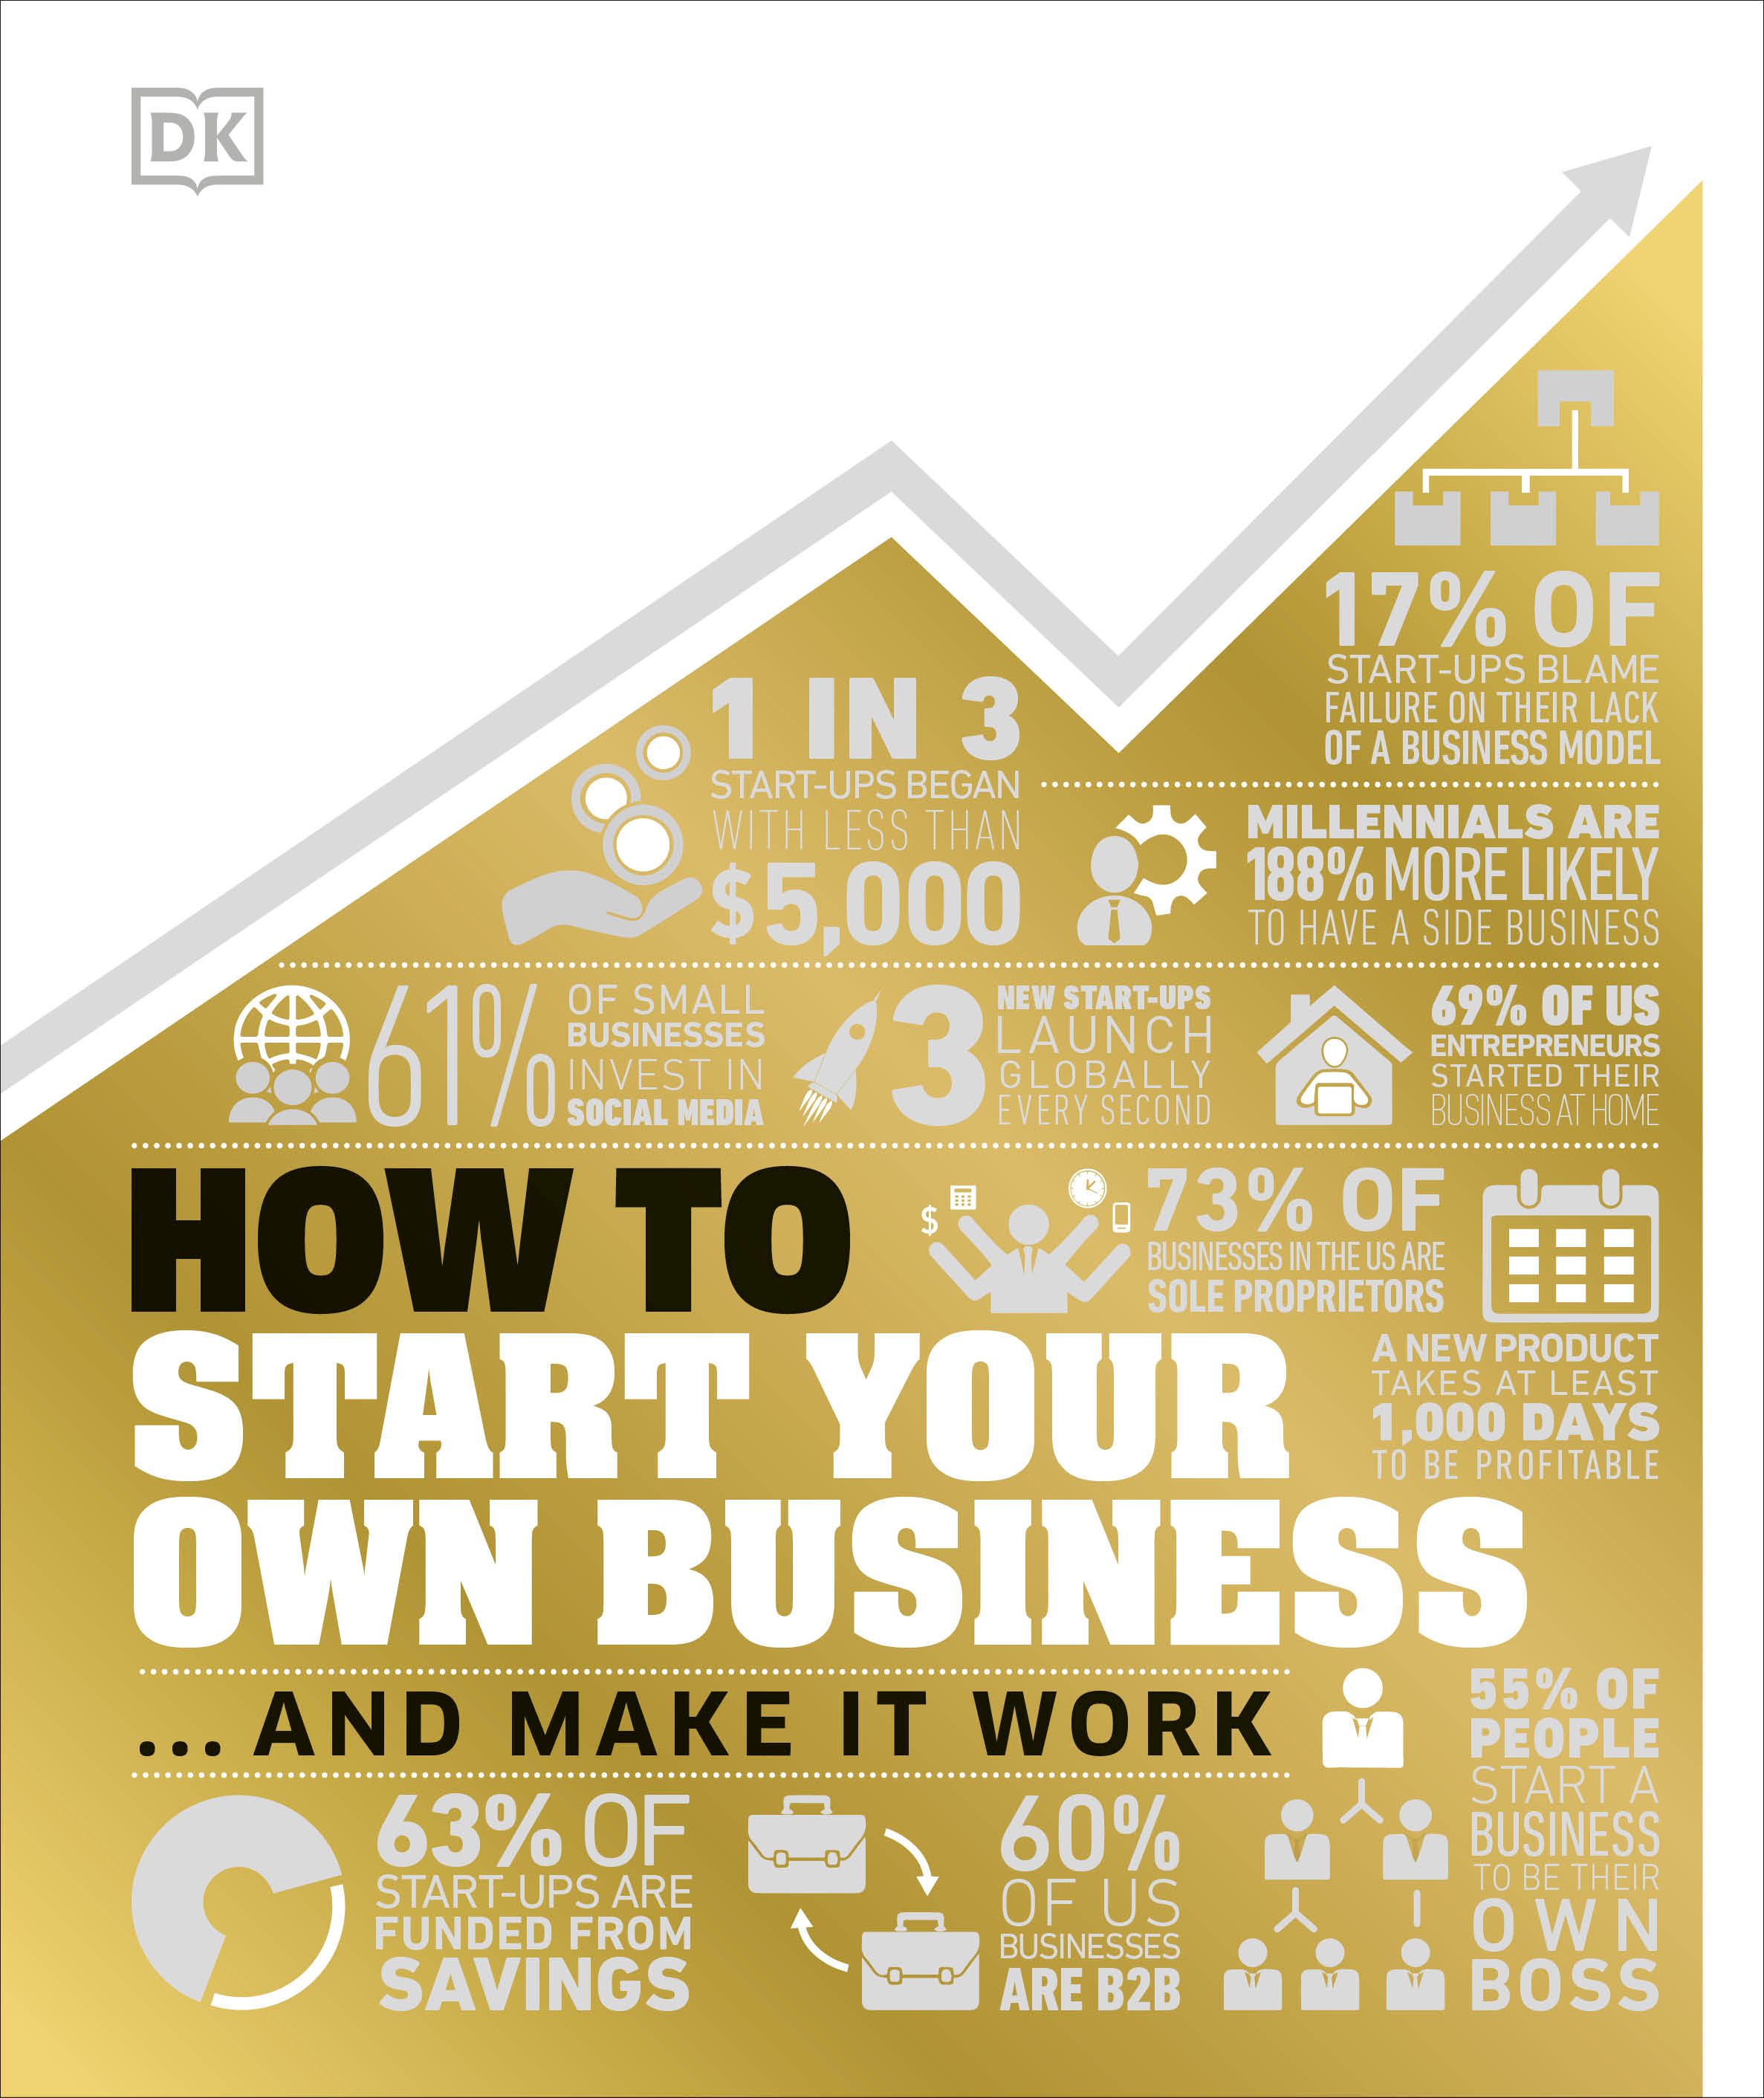 How to Start Your Own Business : The Facts Visually Explained | 